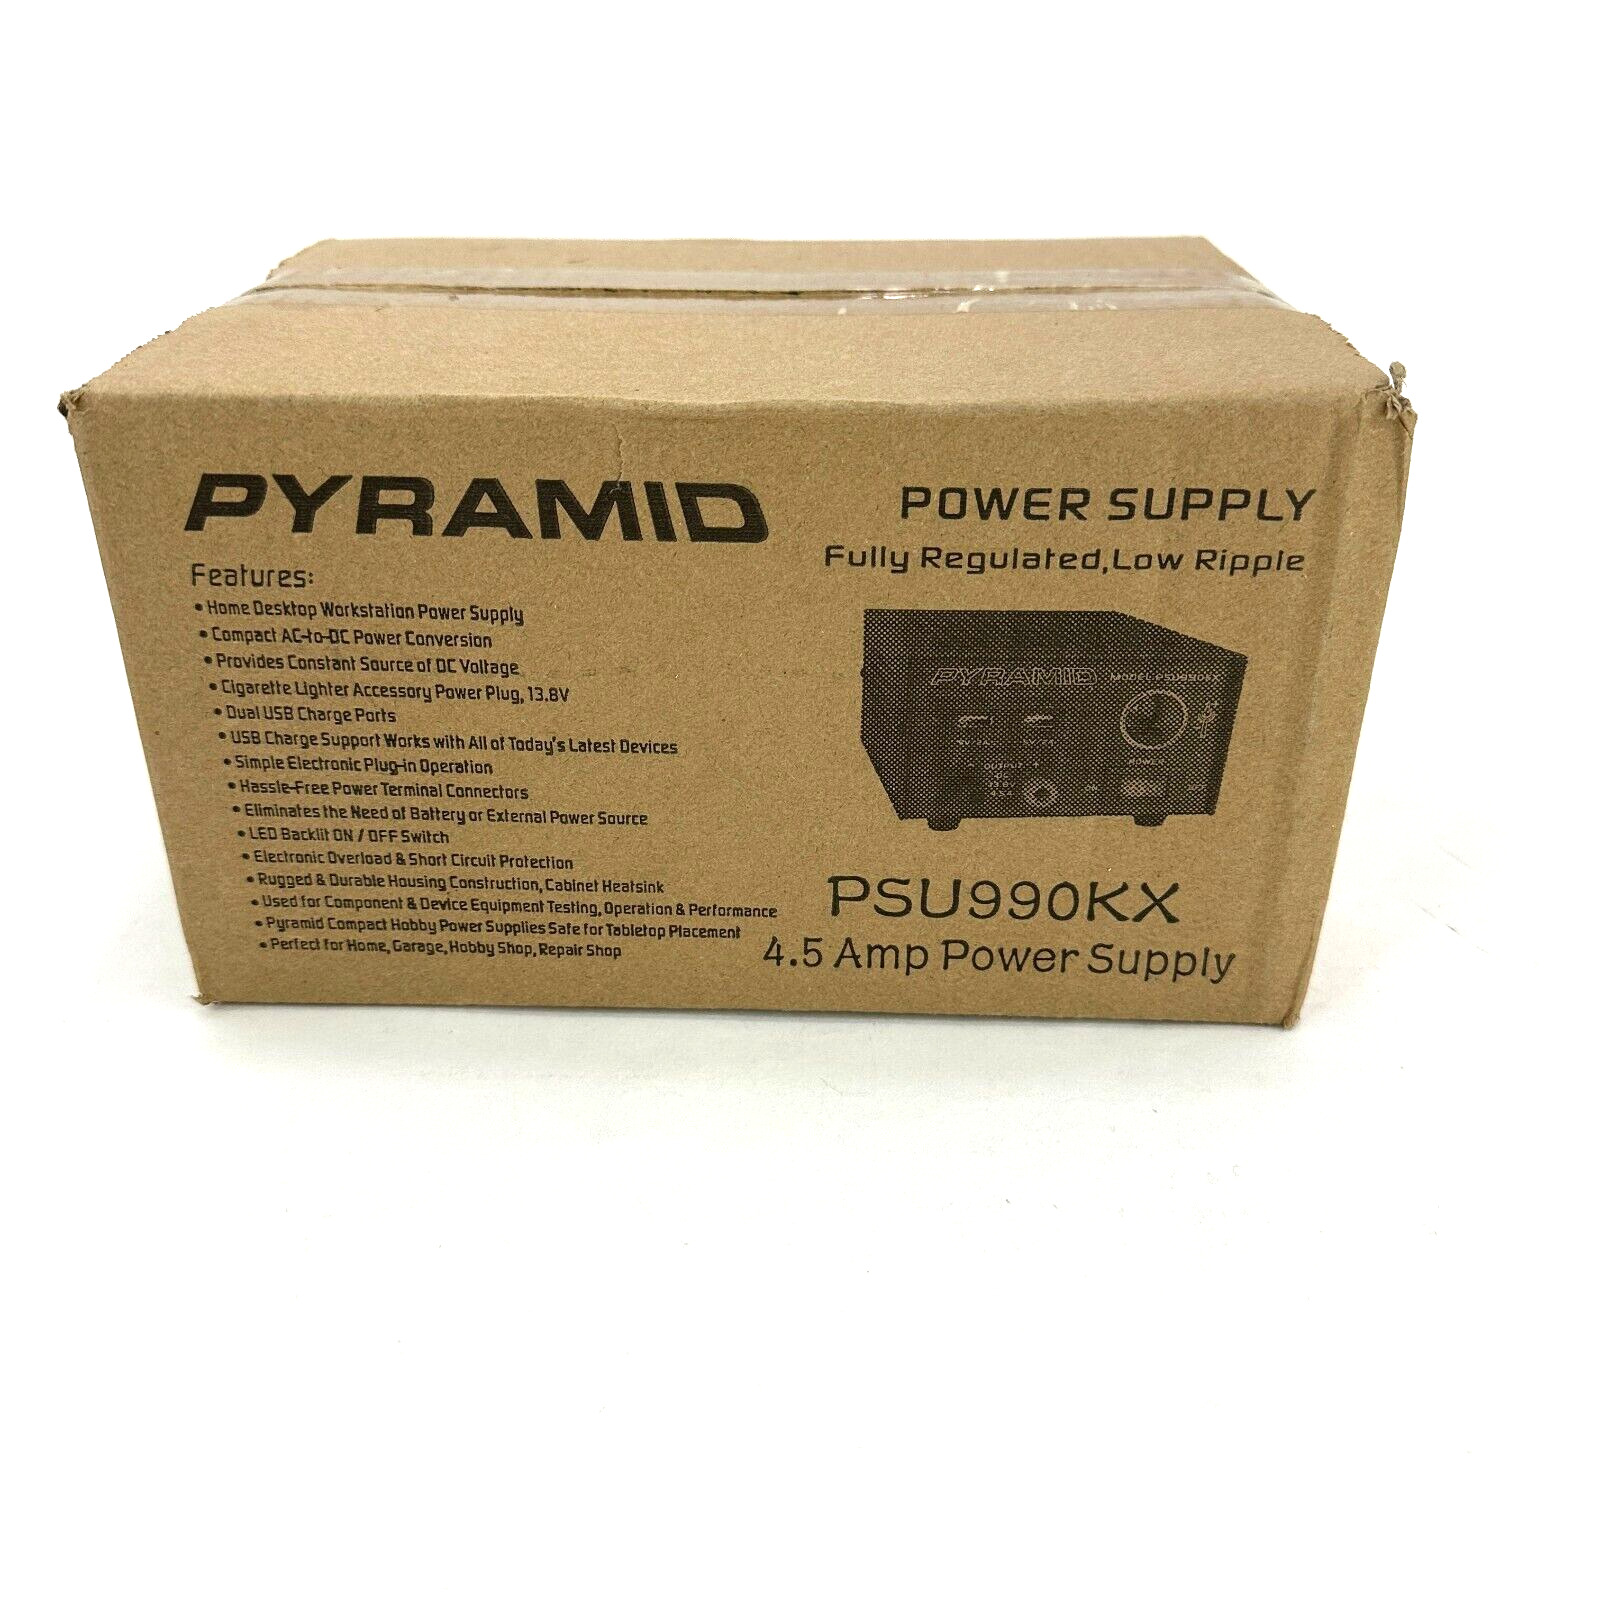 Pyramid Universal Compact Bench Power Supply 7 Amp AC DC Converter Power Supply